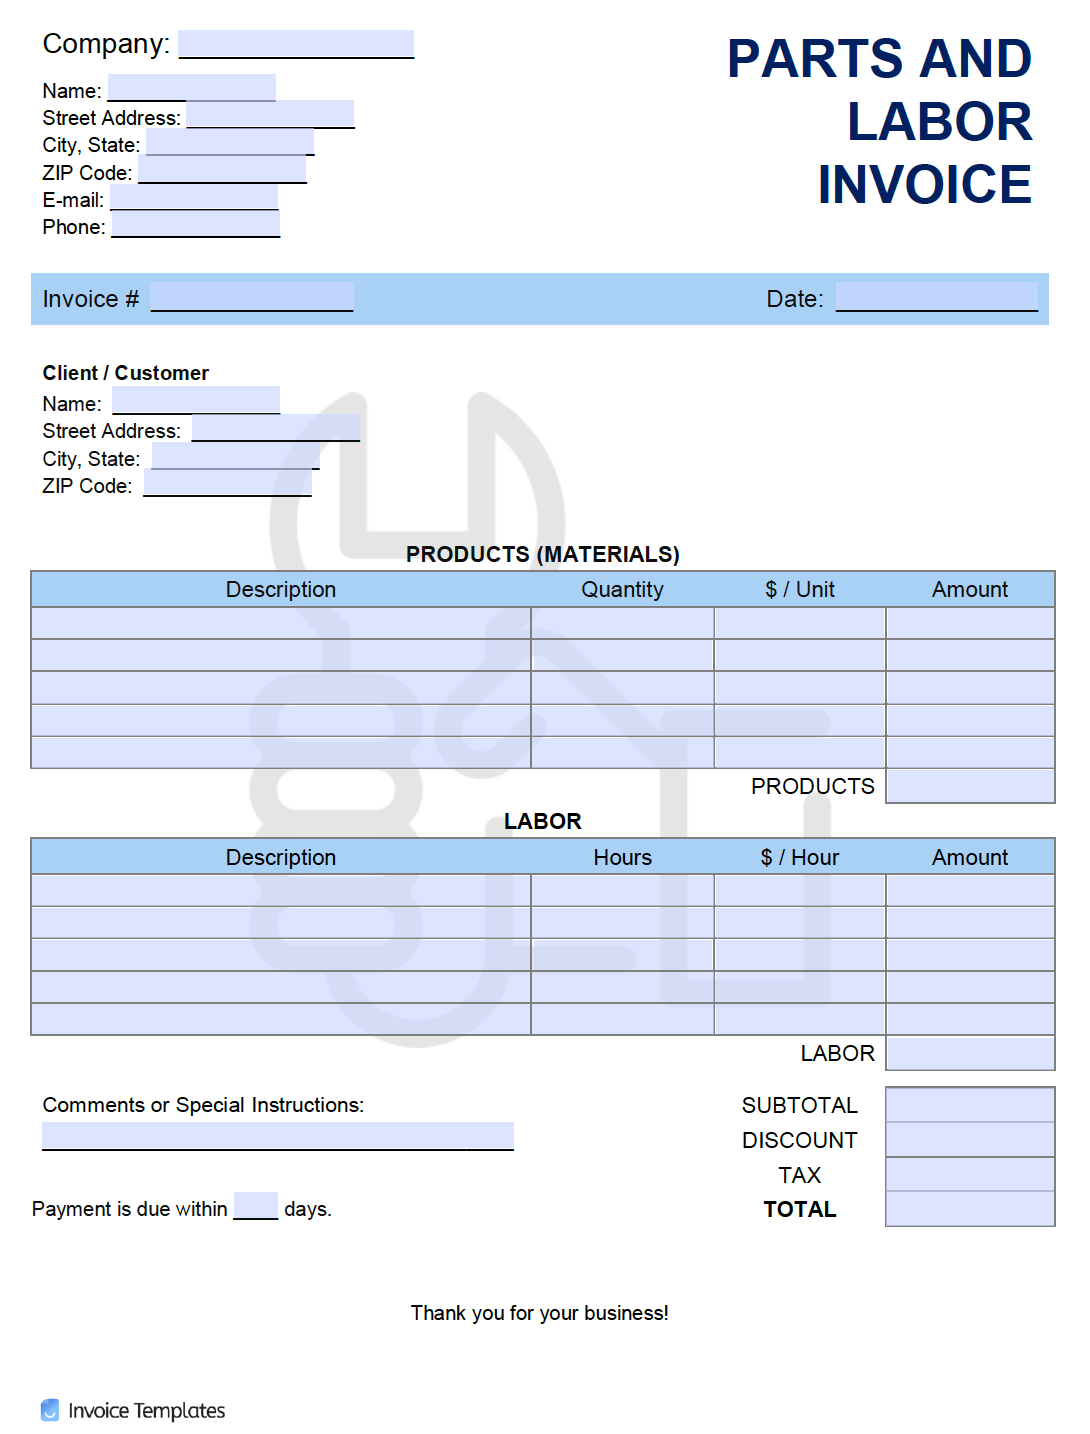 Free Parts and Labor Invoice Template  PDF  WORD  EXCEL Throughout Work Estimate Template Word